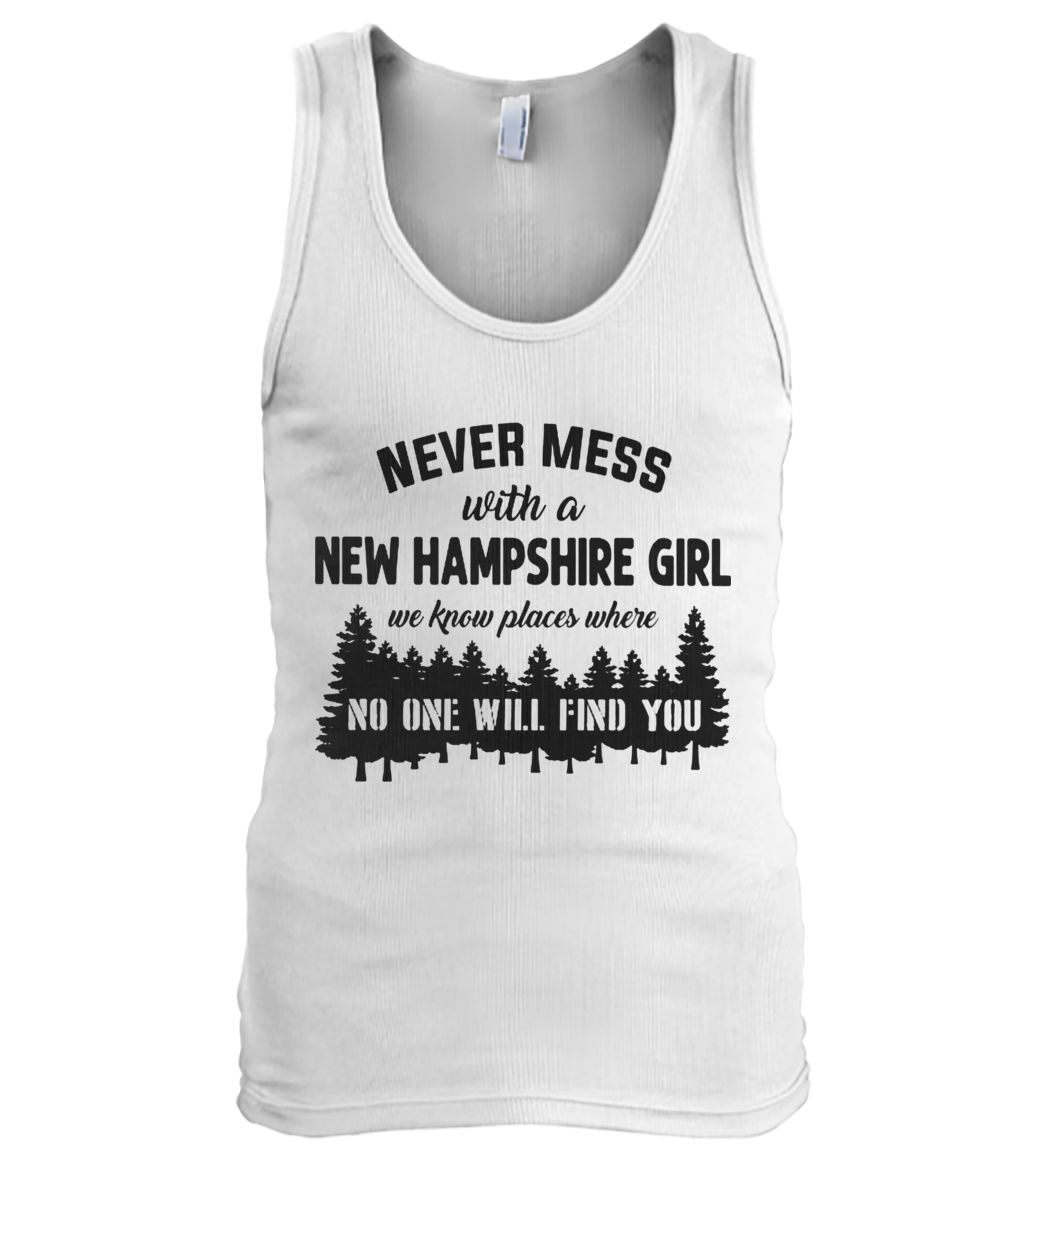 Never mess with a new hampshire girl we know places where no one will find you men's tank top